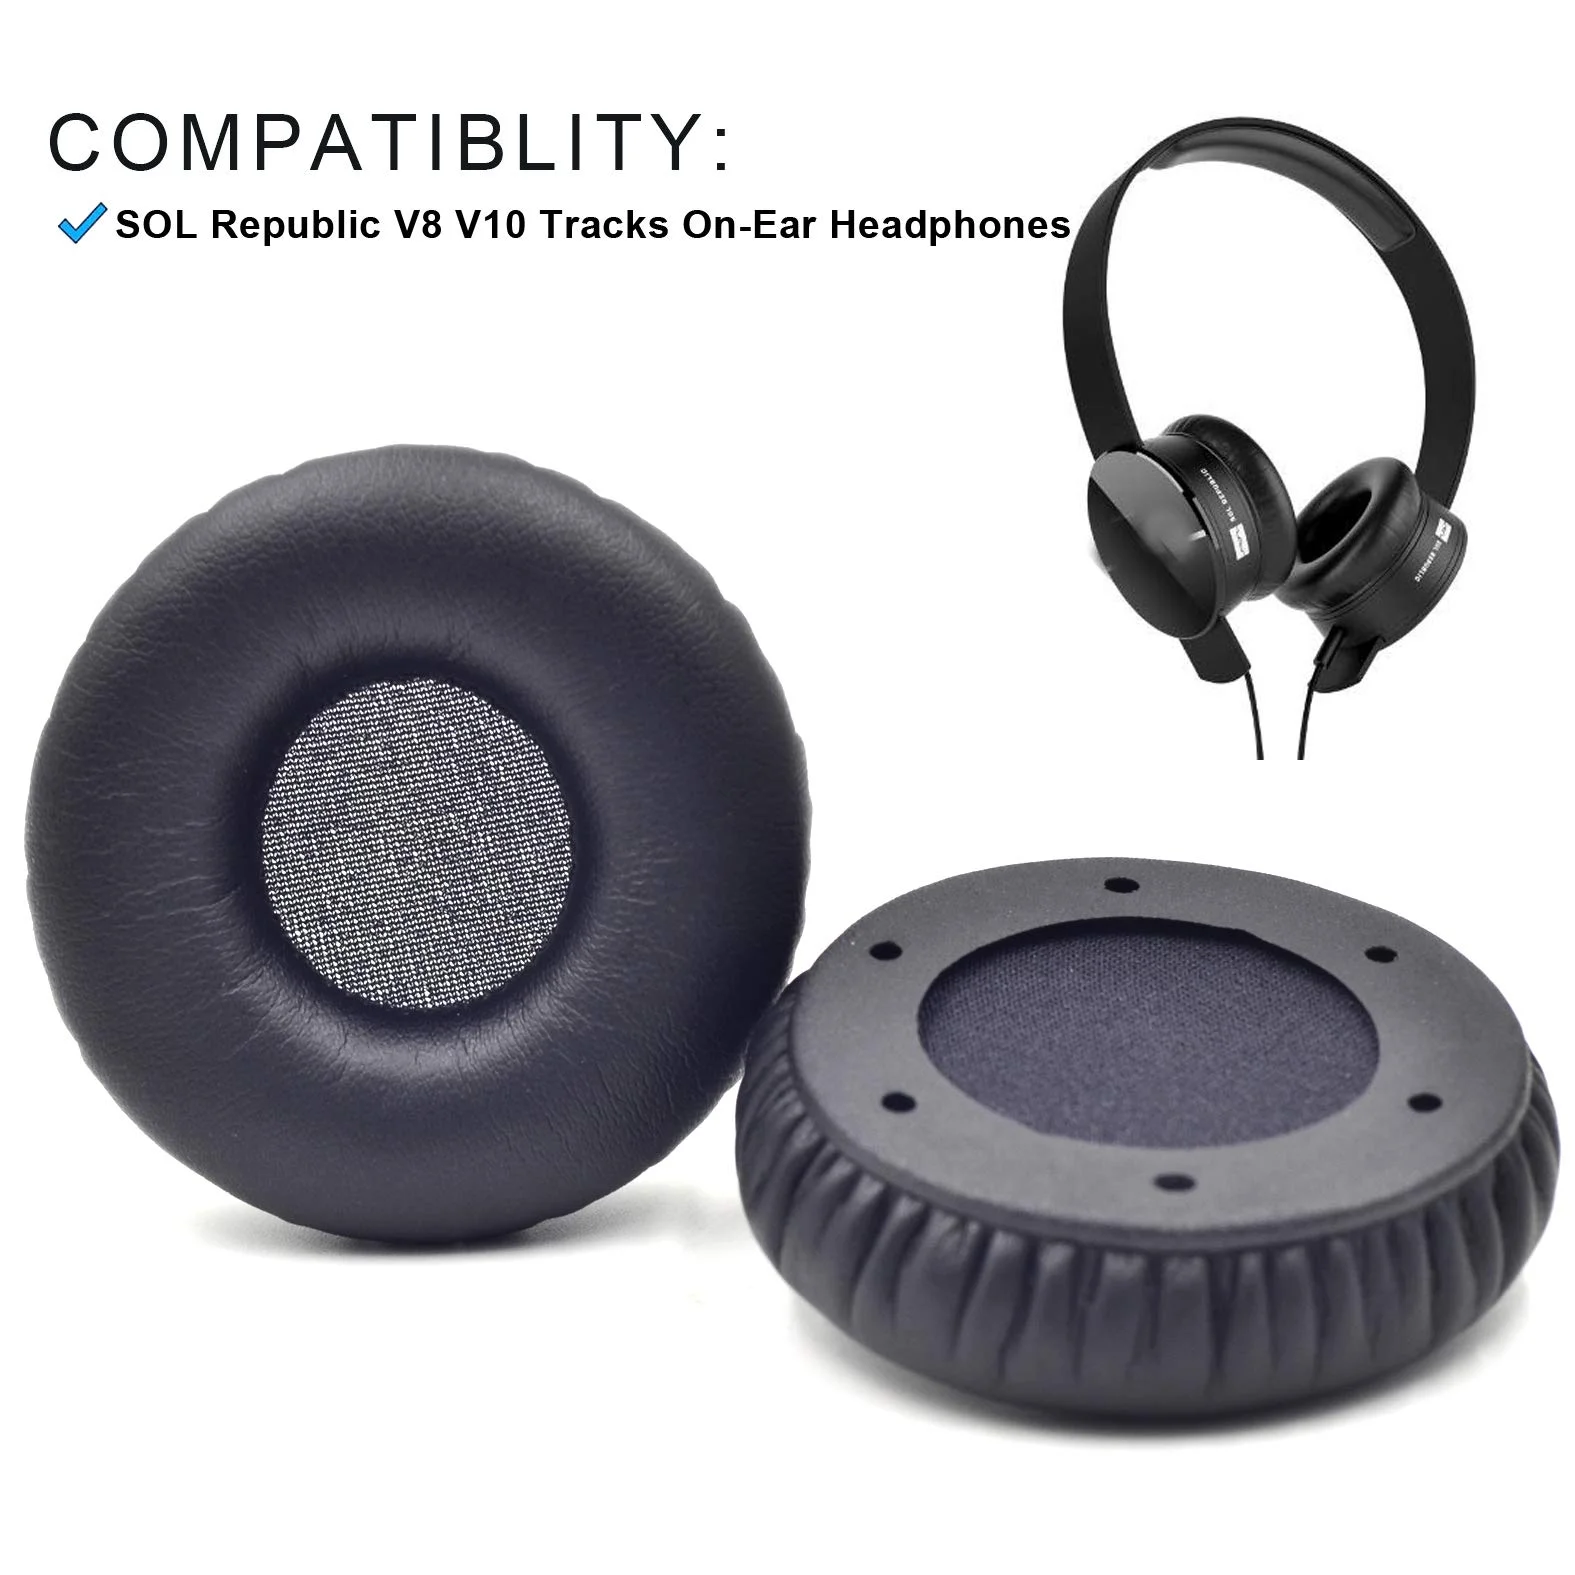 

1Pair Replacement Ear Pads Earpads Headband for Sol Republic Tracks HD V10 V8 Headsets Headphones